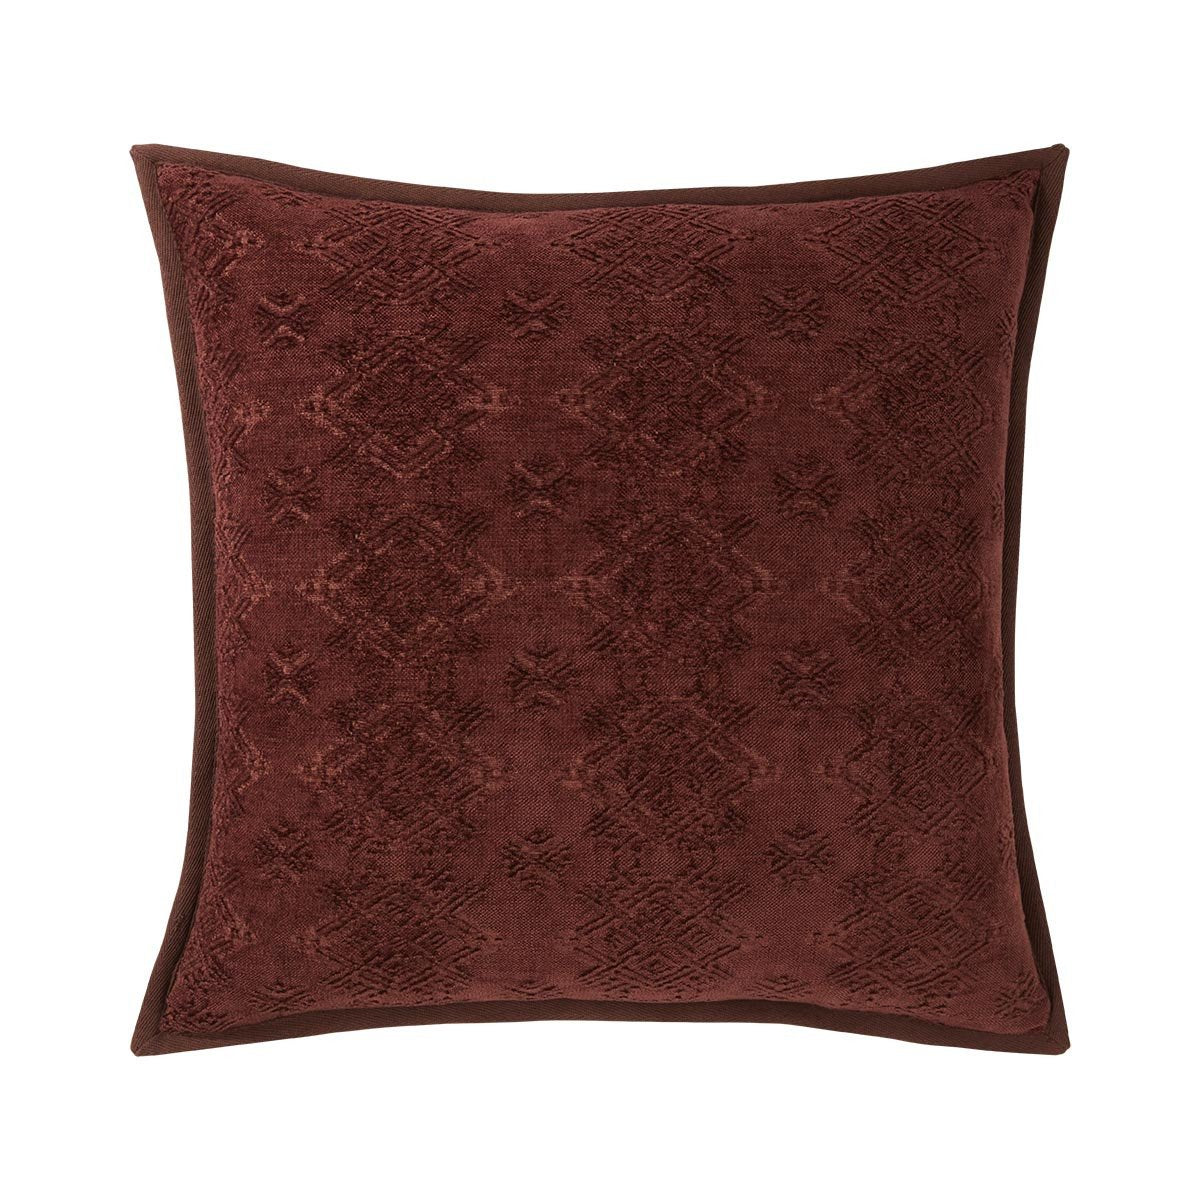 Syracuse Acajou Decorative Pillow by Iosis | Fig Linens and Home